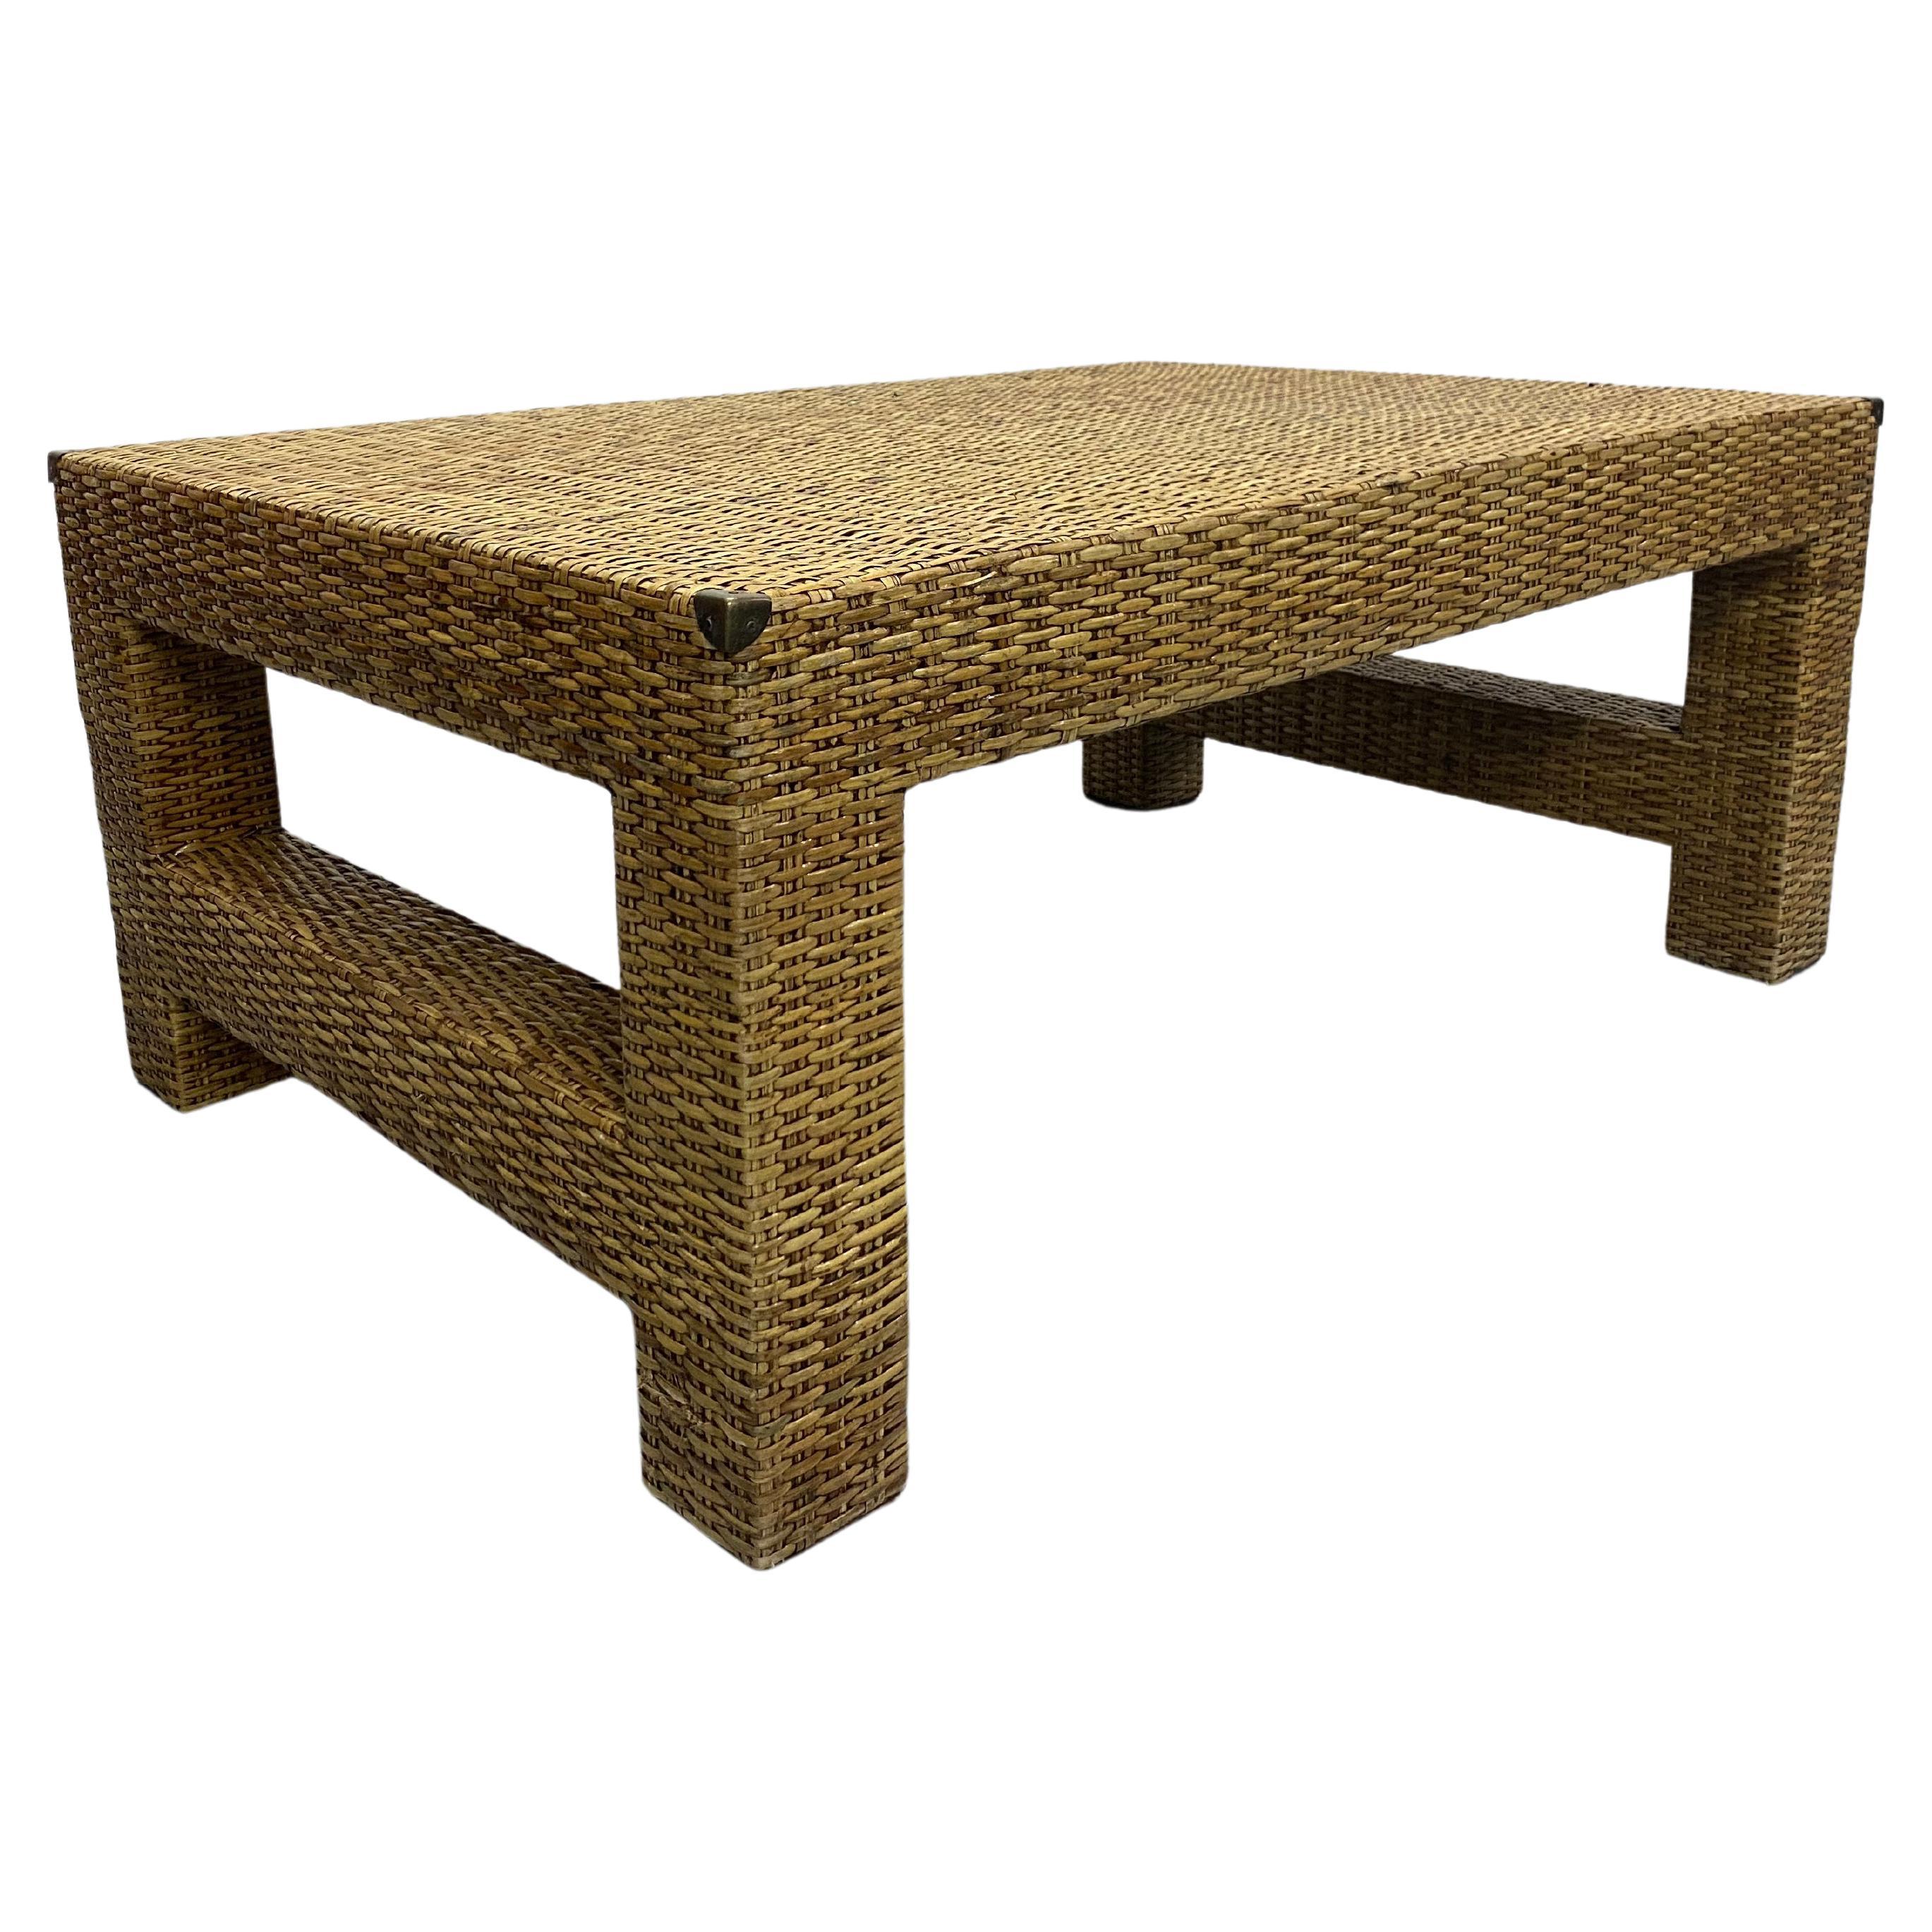 Natural Fiber Woven Rattan Coffee Table with Antique Brass Corners